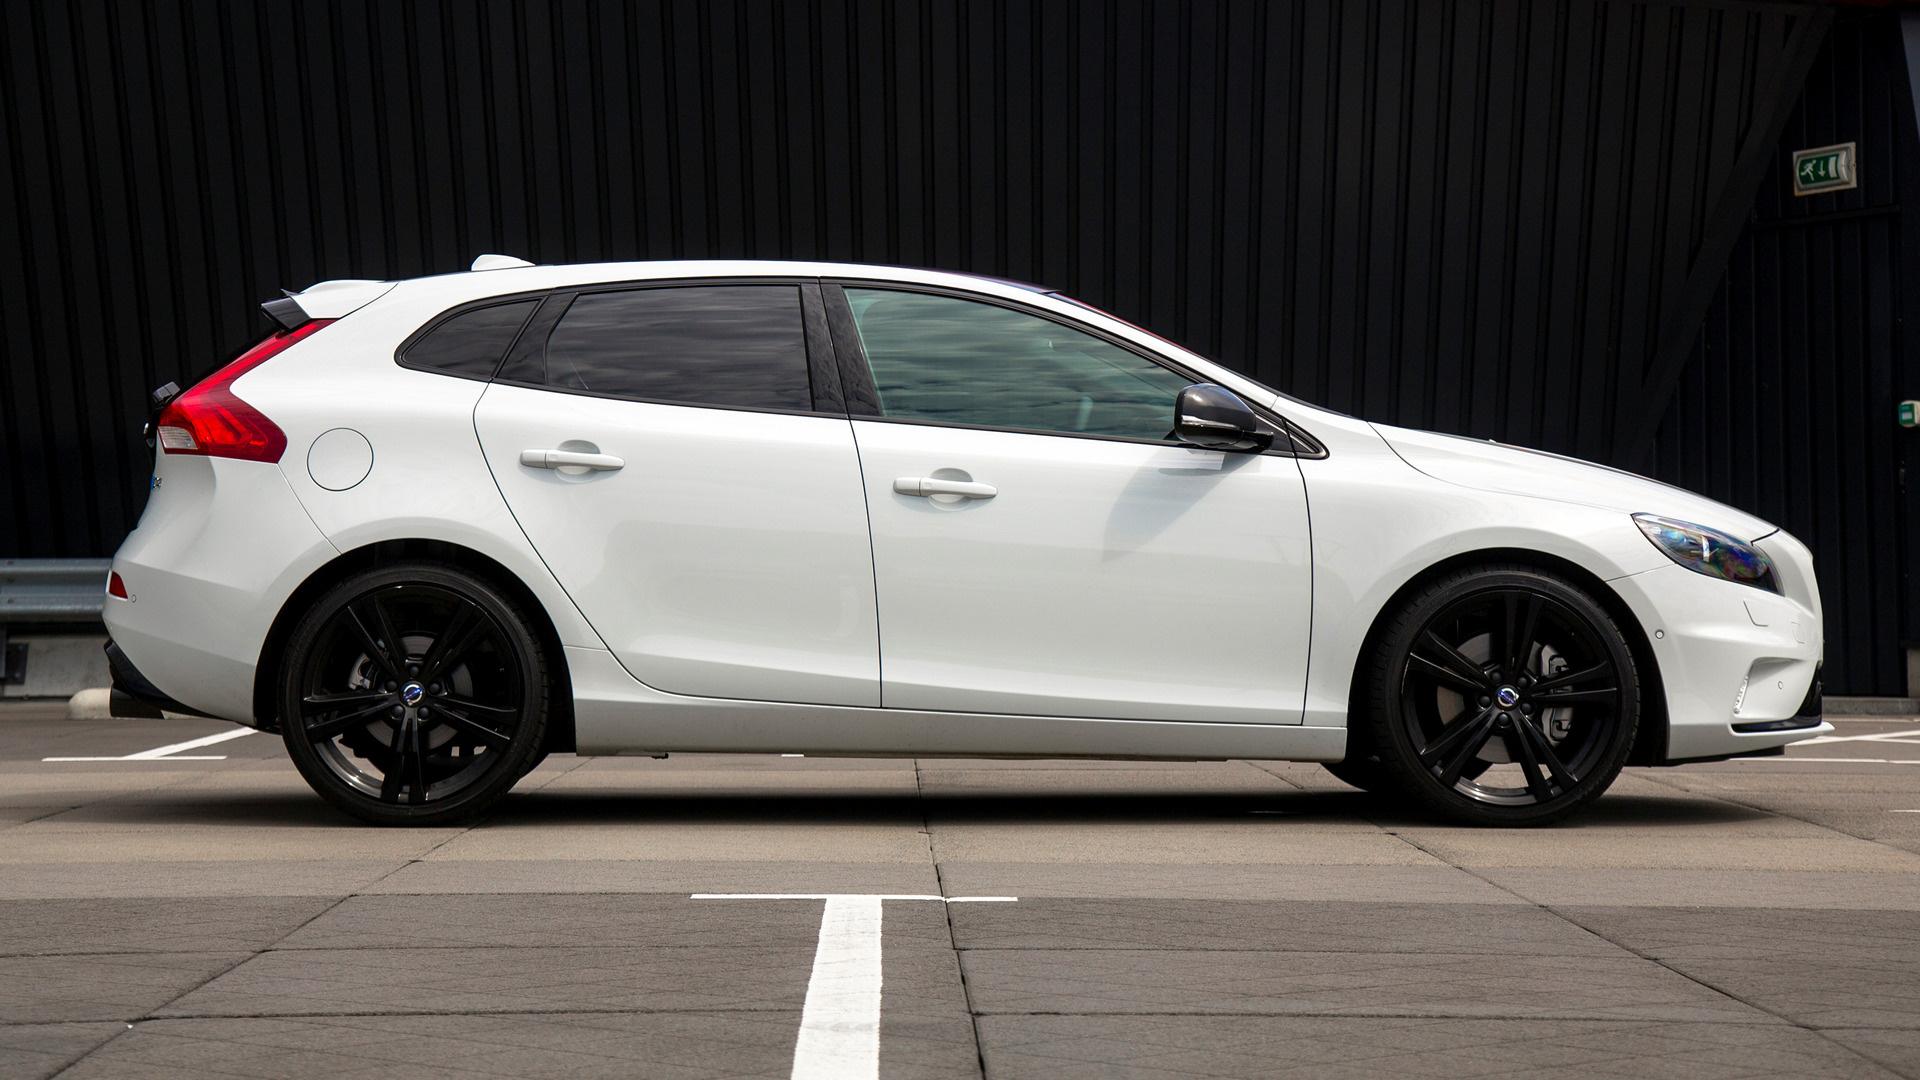 Volvo V40 Carbon Edition and HD Image